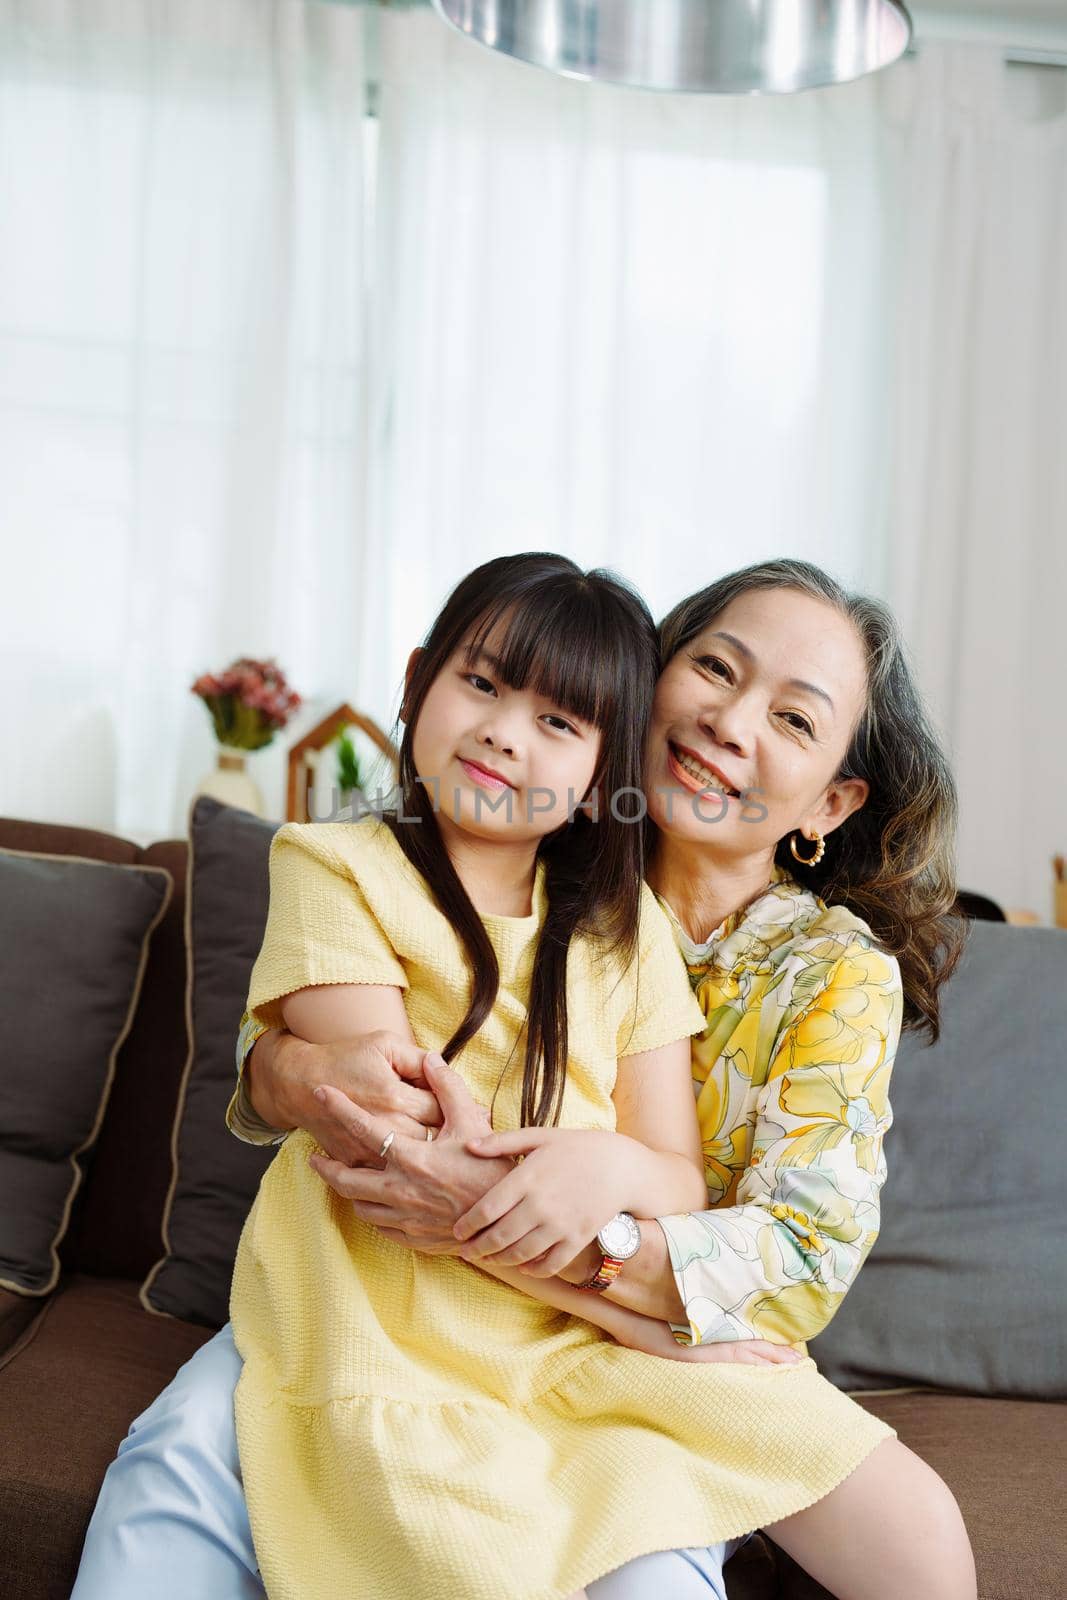 Asian portrait, grandma and granddaughter doing leisure activities and hugging to show their love and care for each other.